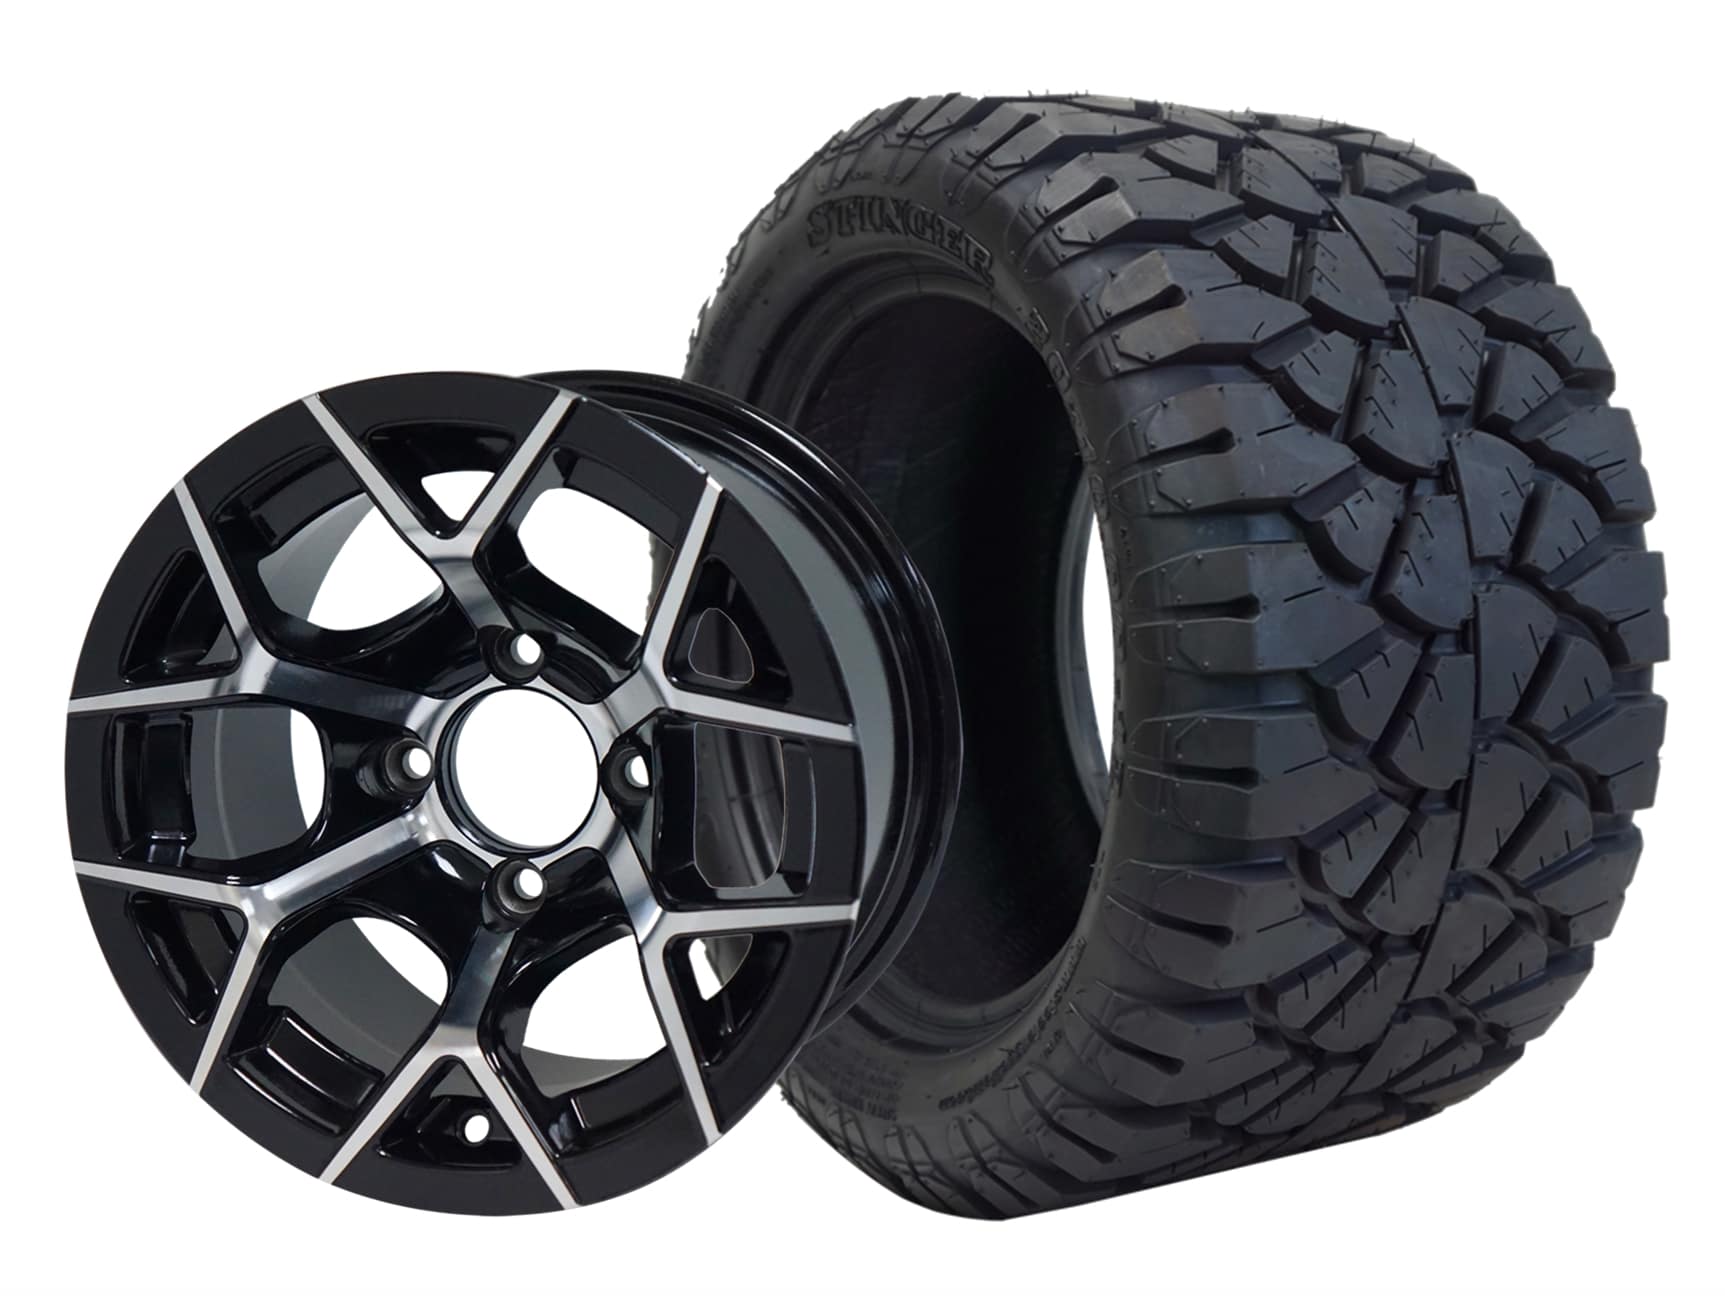 BNDL-TR1204-WH1226-CC0001-LN0004 12″ RALLY MACHINED/BLACK WHEEL – ALUMINUM ALLOY / STEELENG 20″X10″-12″ STINGER ALL TERRAIN TIRE DOT APPROVED